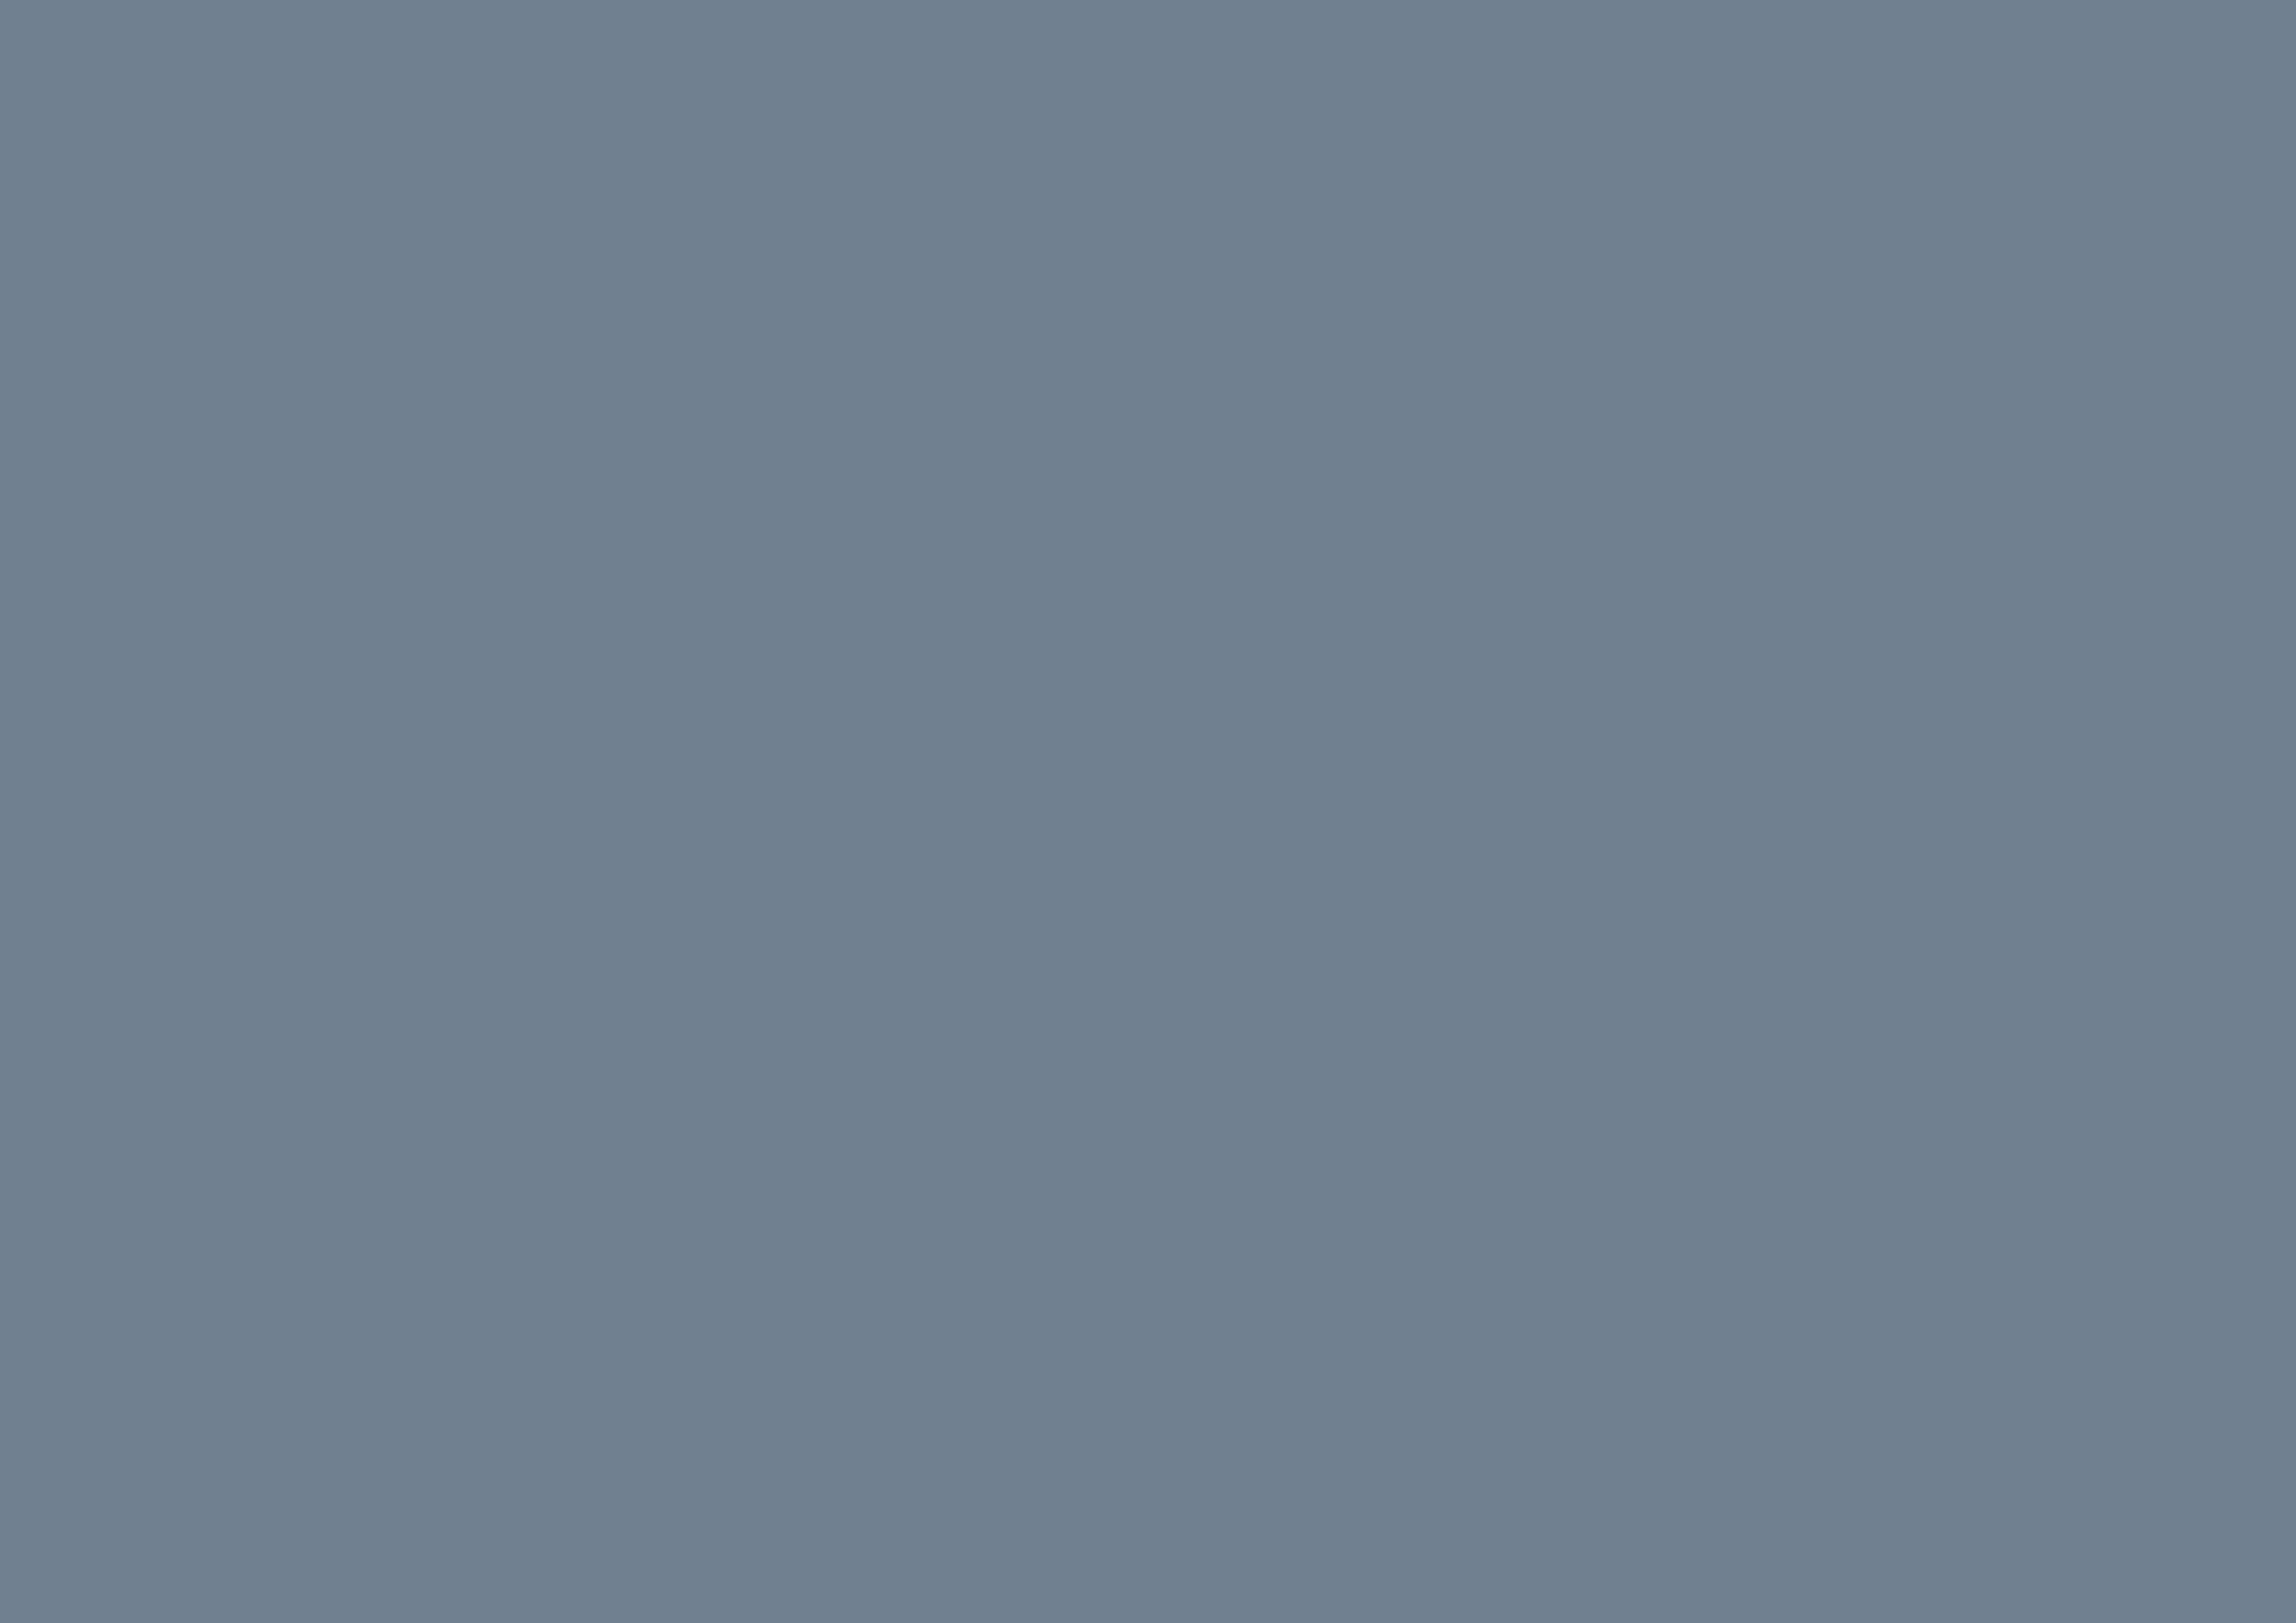 3508x2480 Slate Gray Solid Color Background